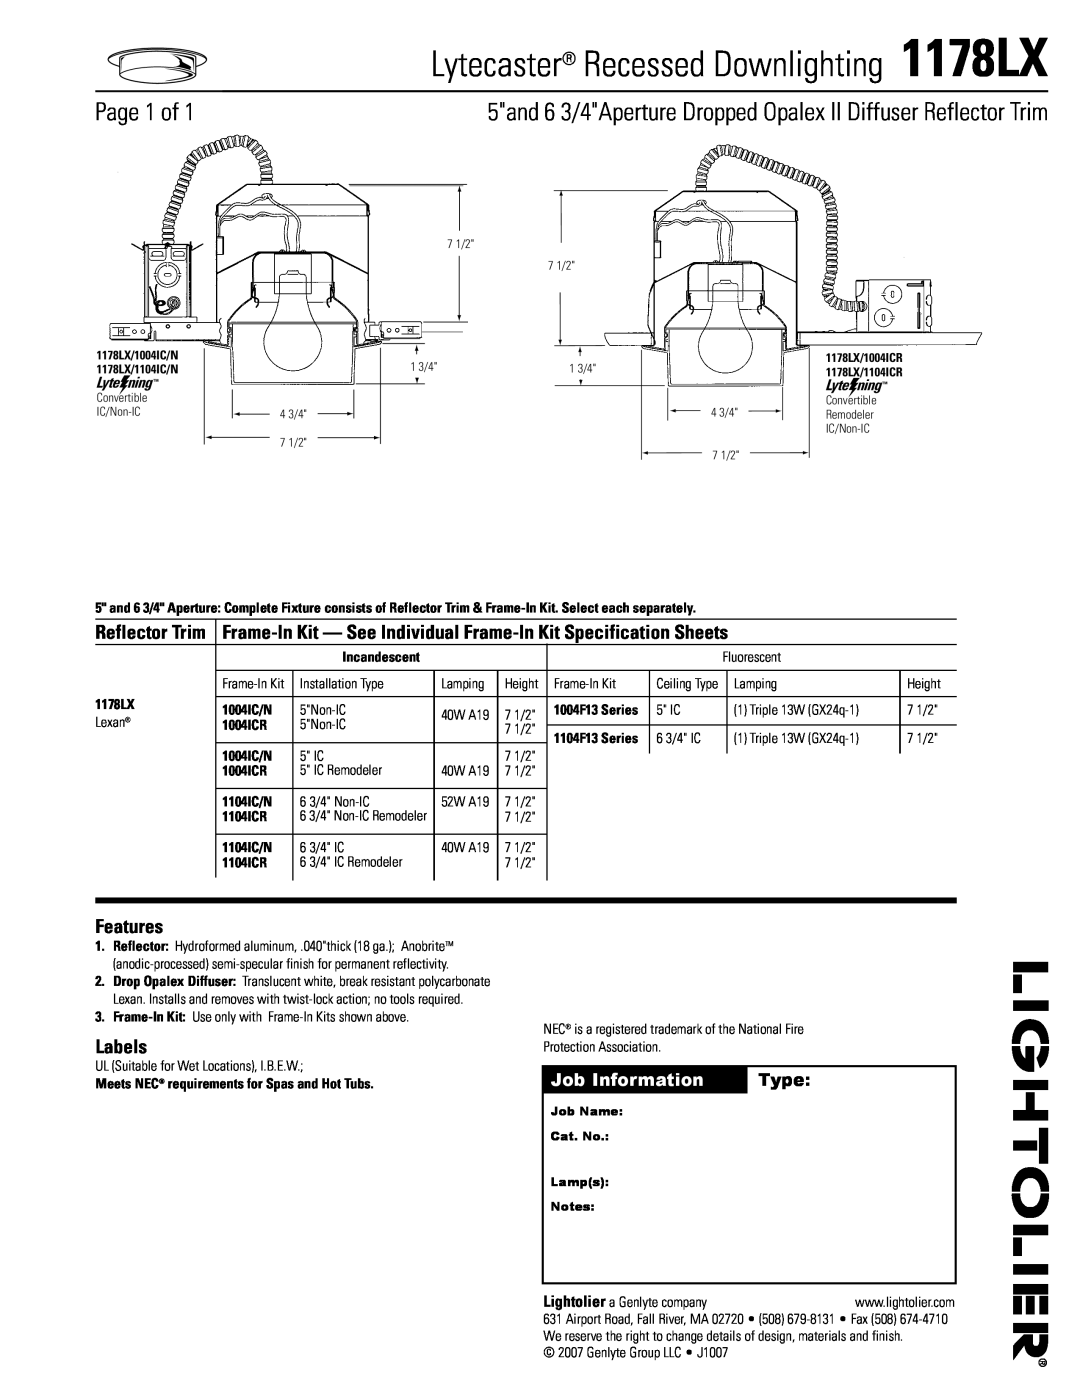 Lightolier specifications Lytecaster Recessed Downlighting 1178LX, Page 1 of, Features, Labels, Reflector Trim, Type 